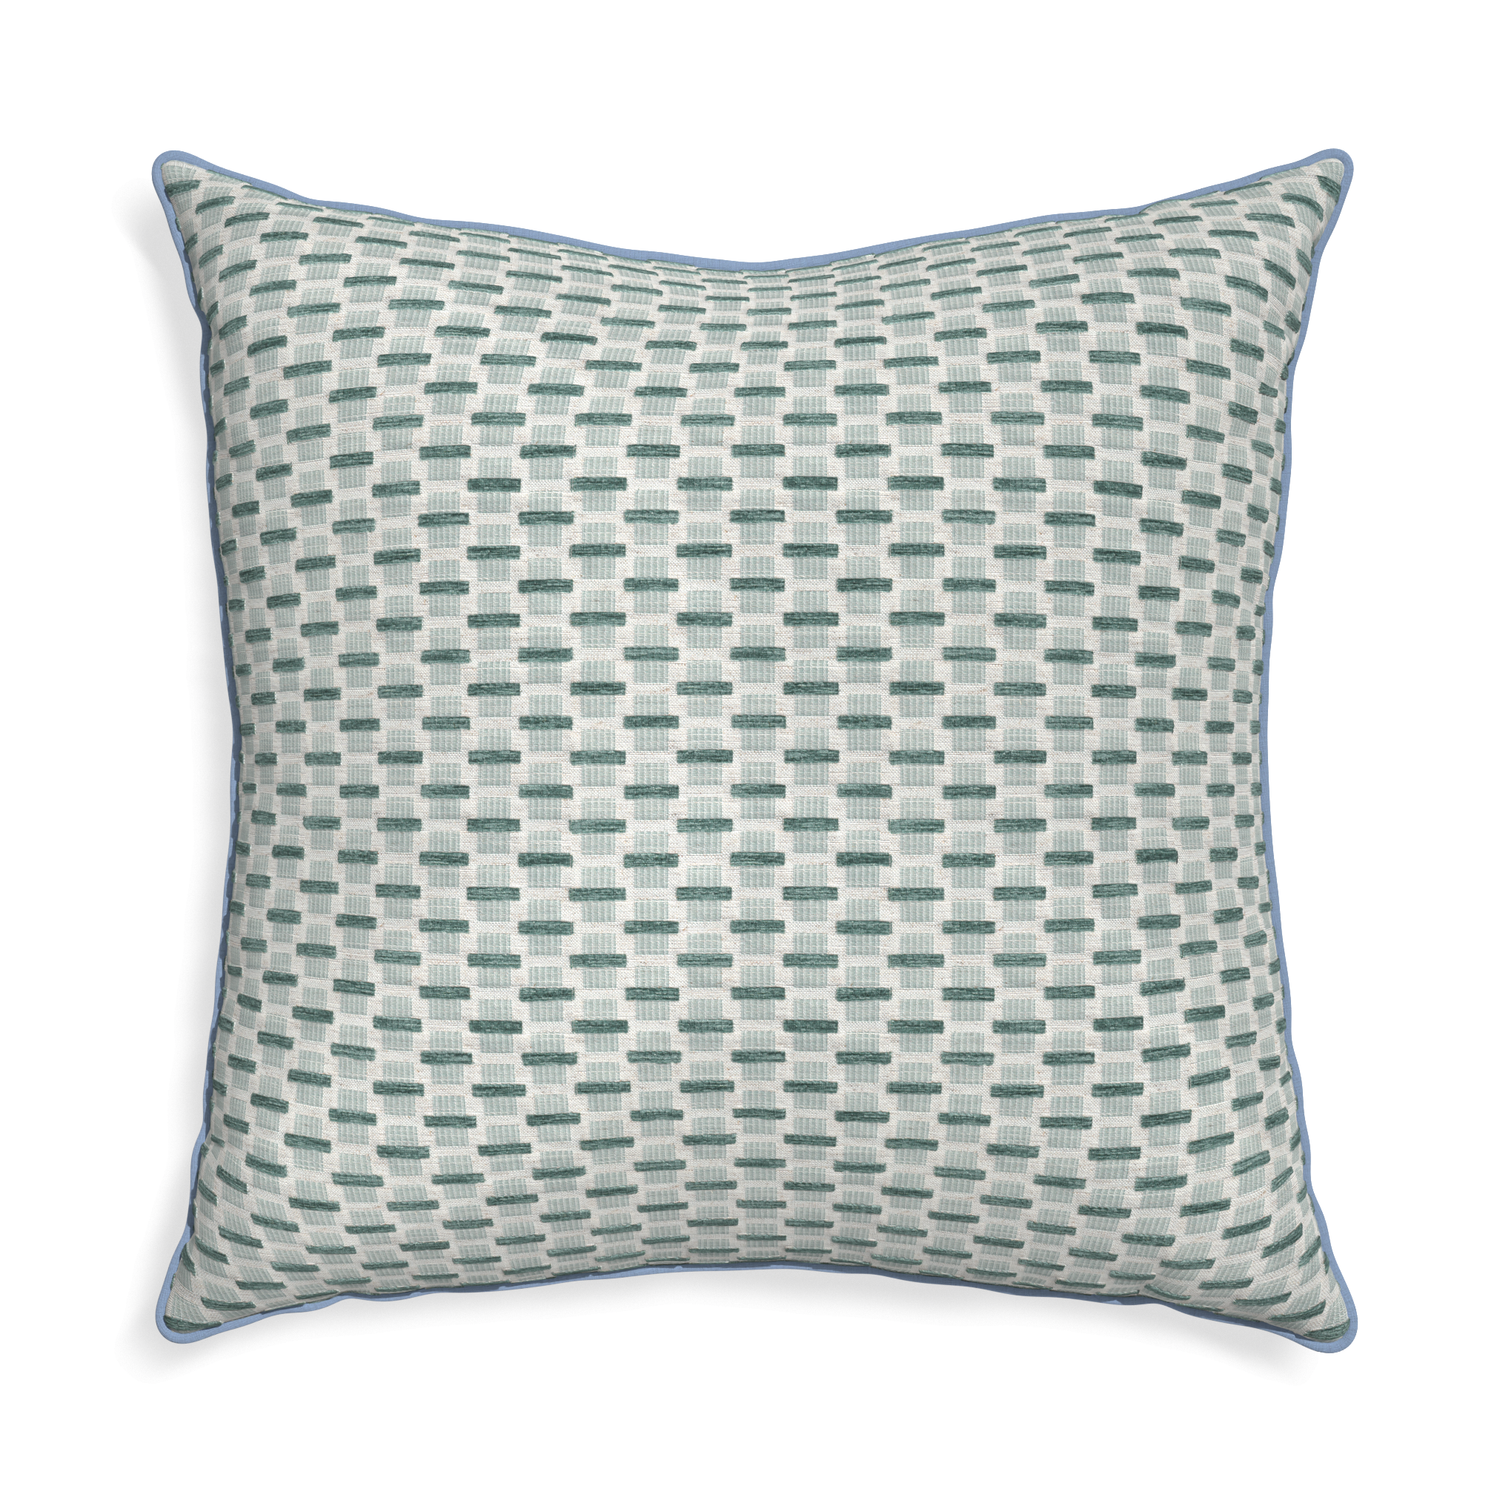 Euro-sham willow mint custom green geometric chenillepillow with sky piping on white background